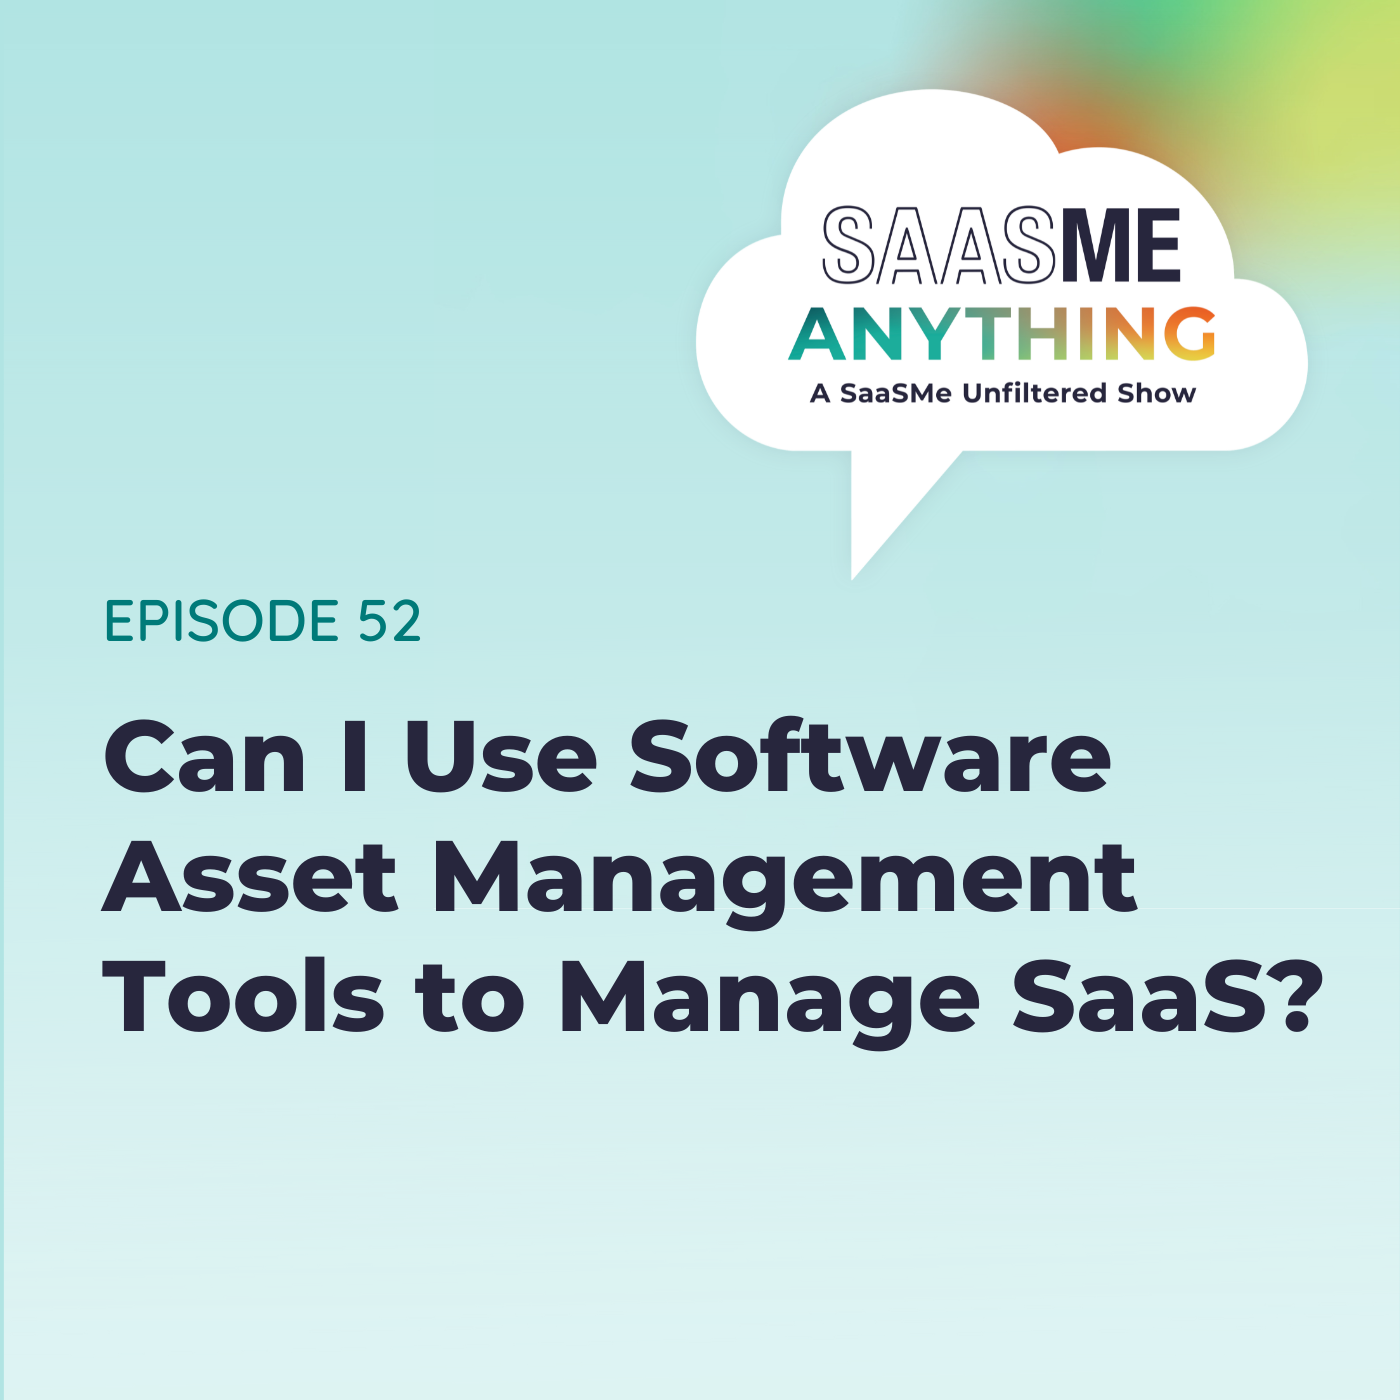 Can I Use Software Asset Management Tools to Manage SaaS?